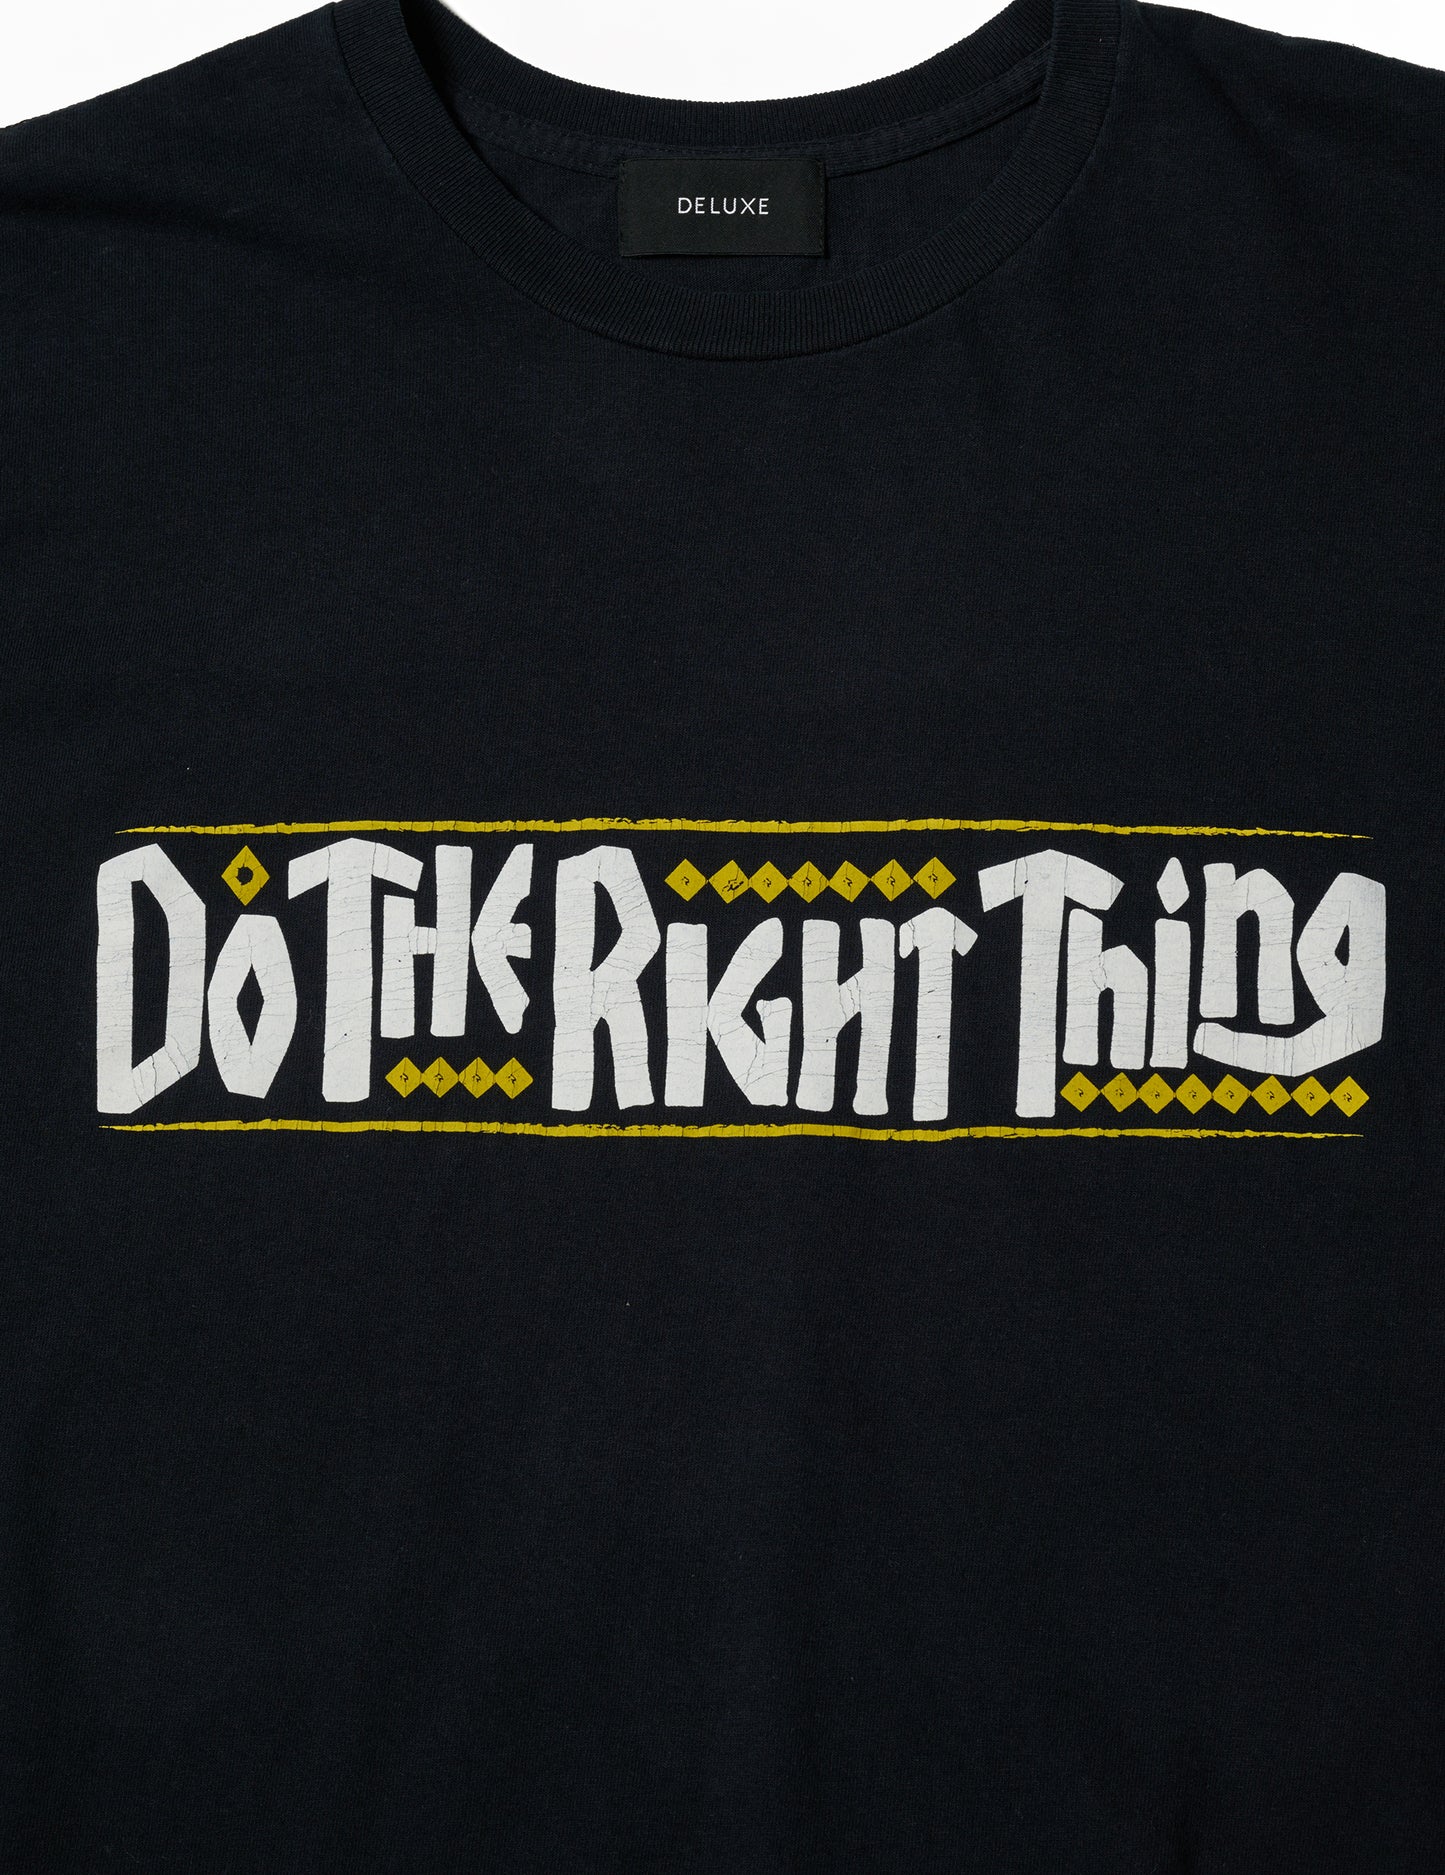 Do the right thing x DELUXE TEE WHITE